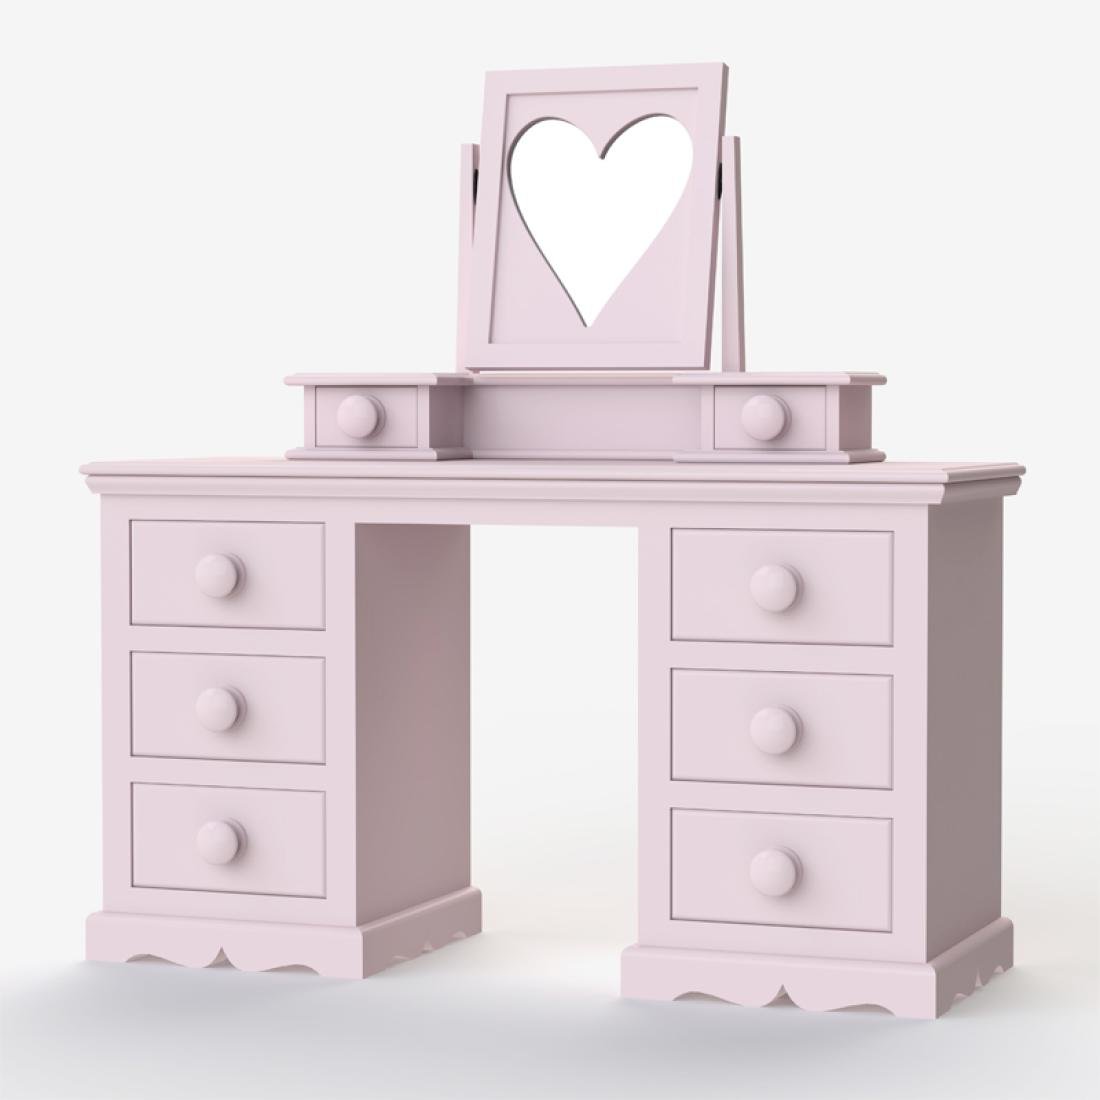 Amazon.co.jp: Dressing table Large capacity dressing table with adjustable  brightness mirror, MDF dressing table with round stool, girl dresser for  bedroom dressing room girl dresser : Home & Kitchen